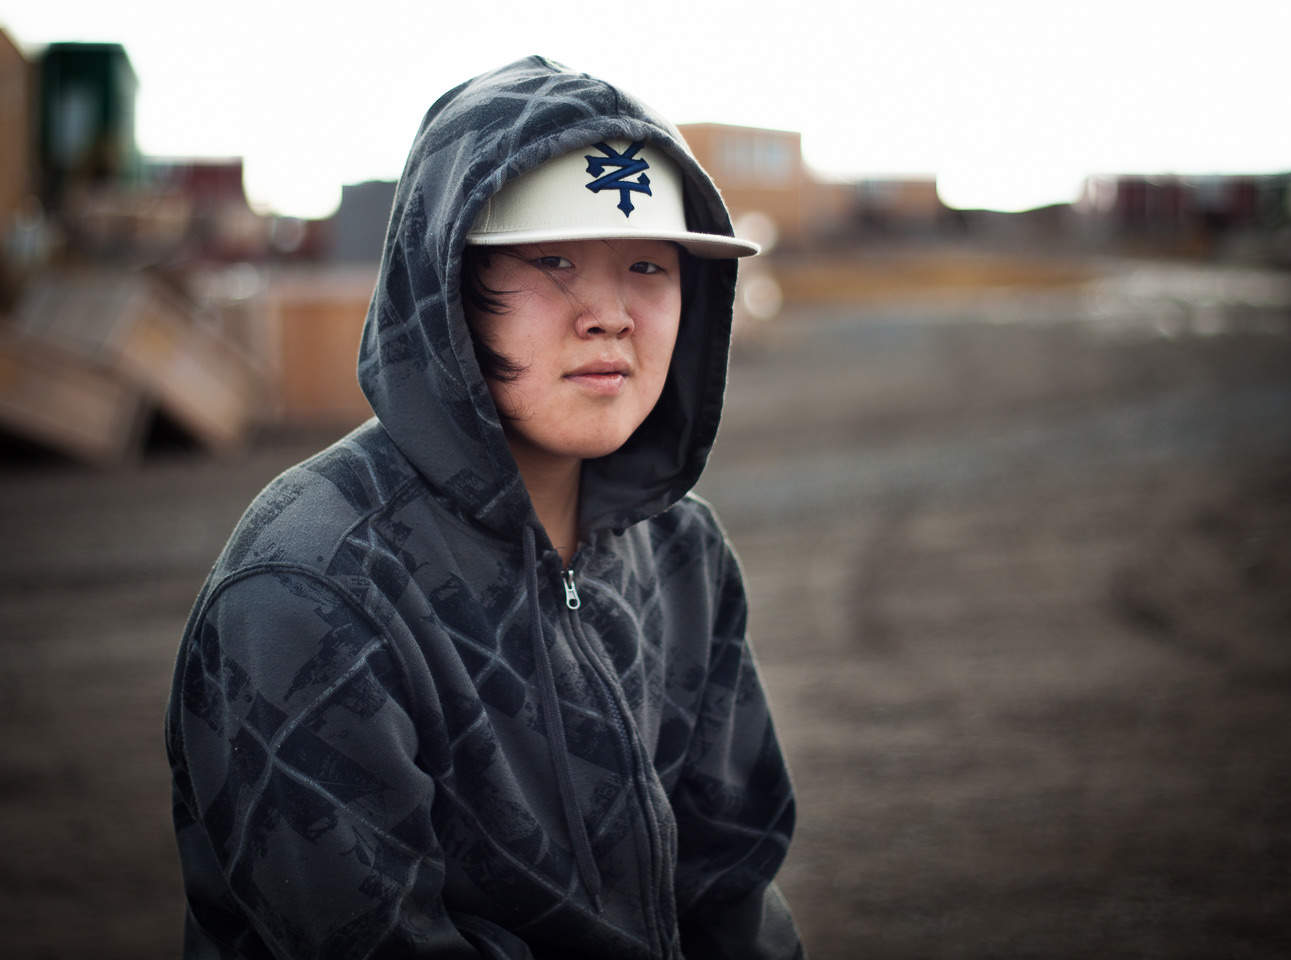 A youth in the village of Kugluktuk, Canada.